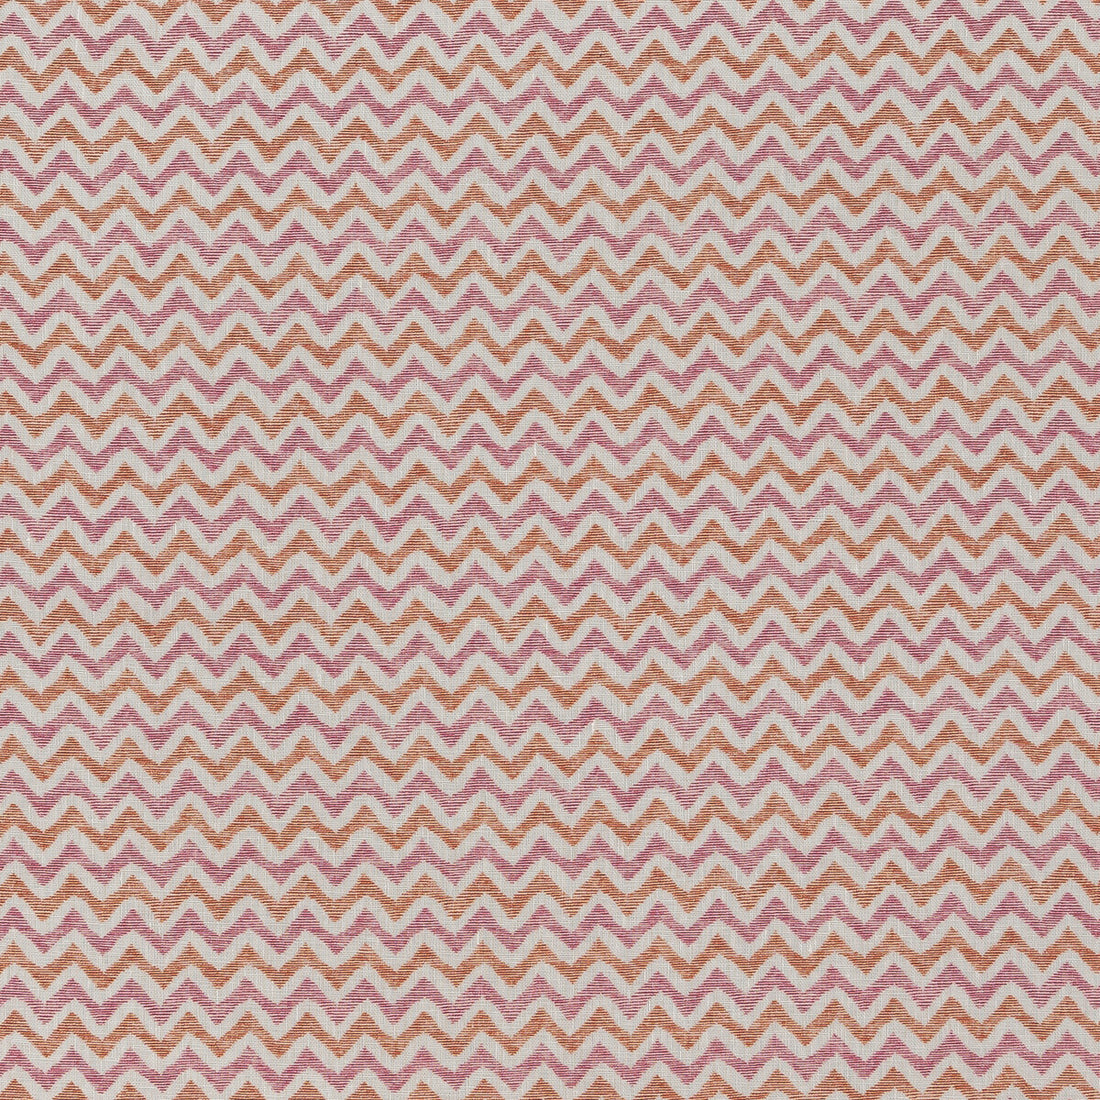 Baby Colebrook fabric in pink/orange color - pattern BFC-3698.712.0 - by Lee Jofa in the Blithfield collection